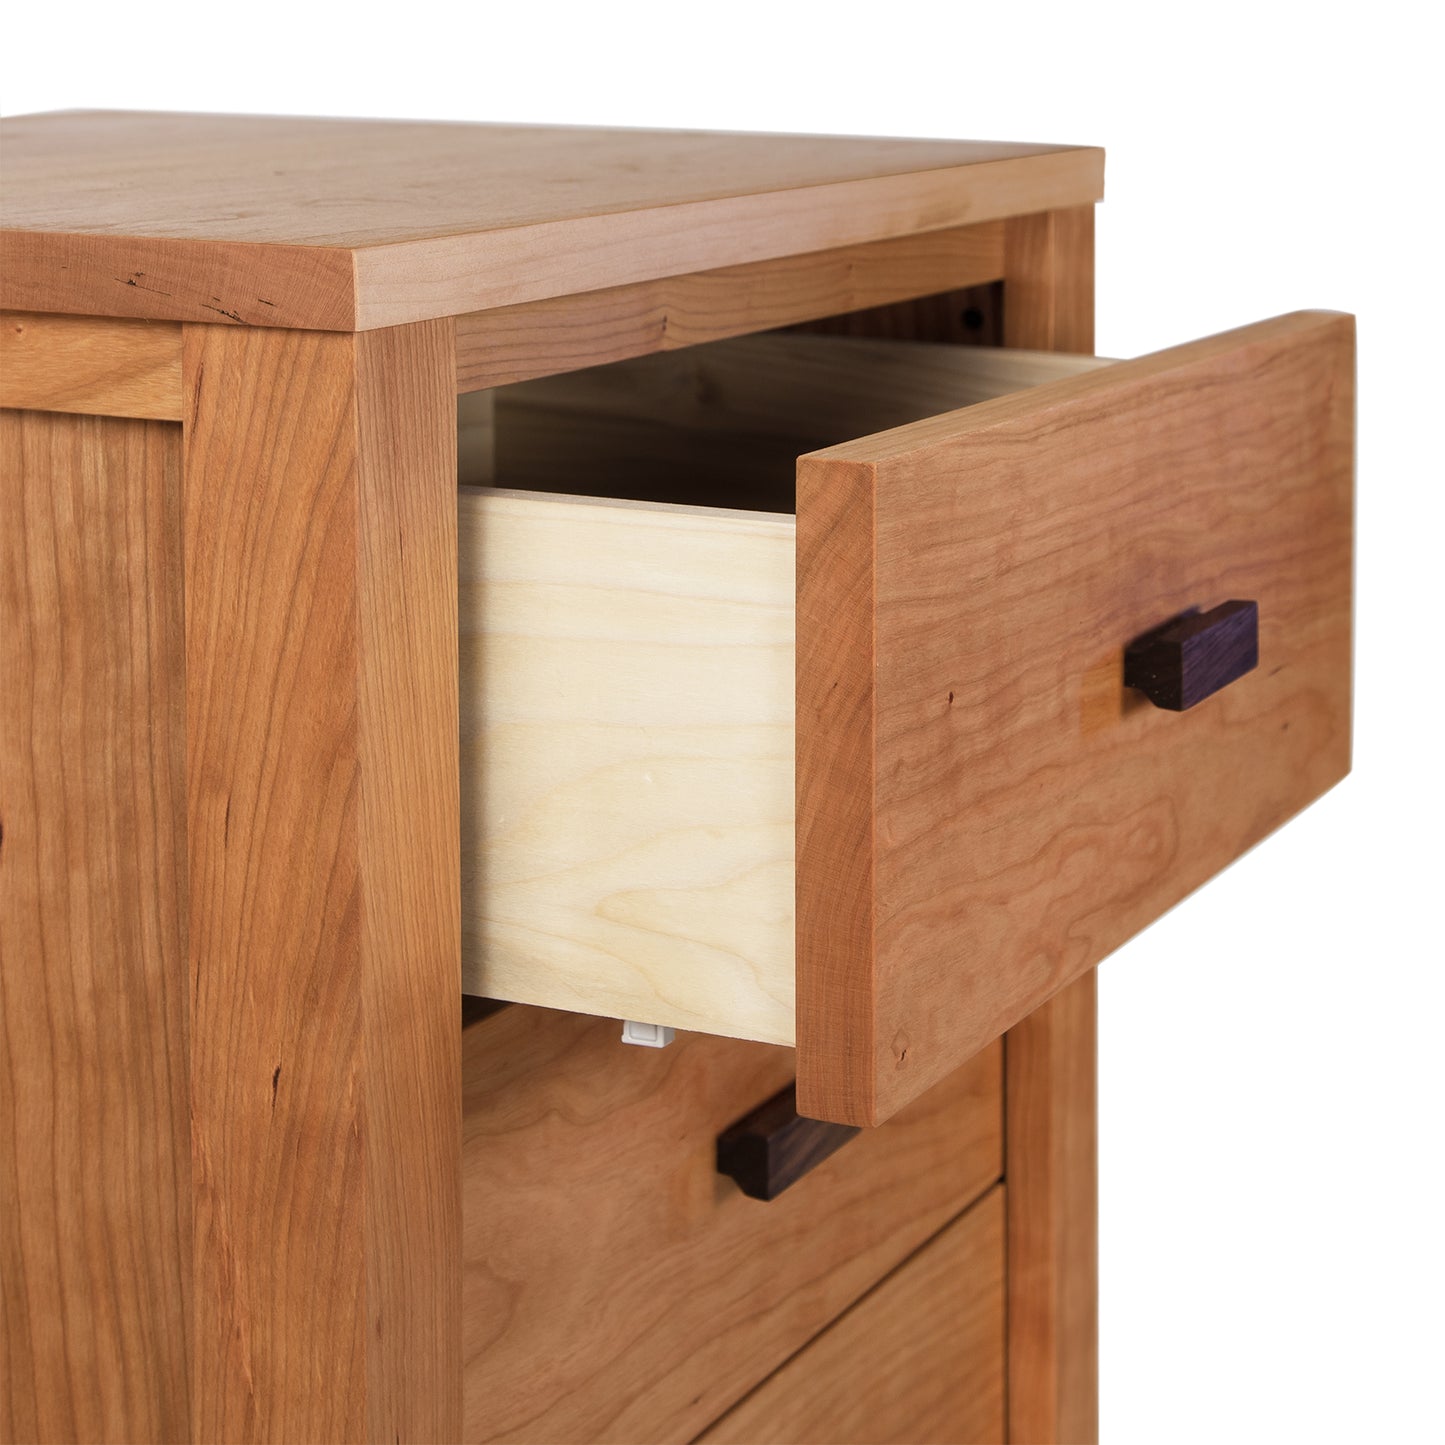 A Maple Corner Woodworks Andover Modern 3-Drawer Nightstand showcasing Vermont craftsmanship and a modern design.